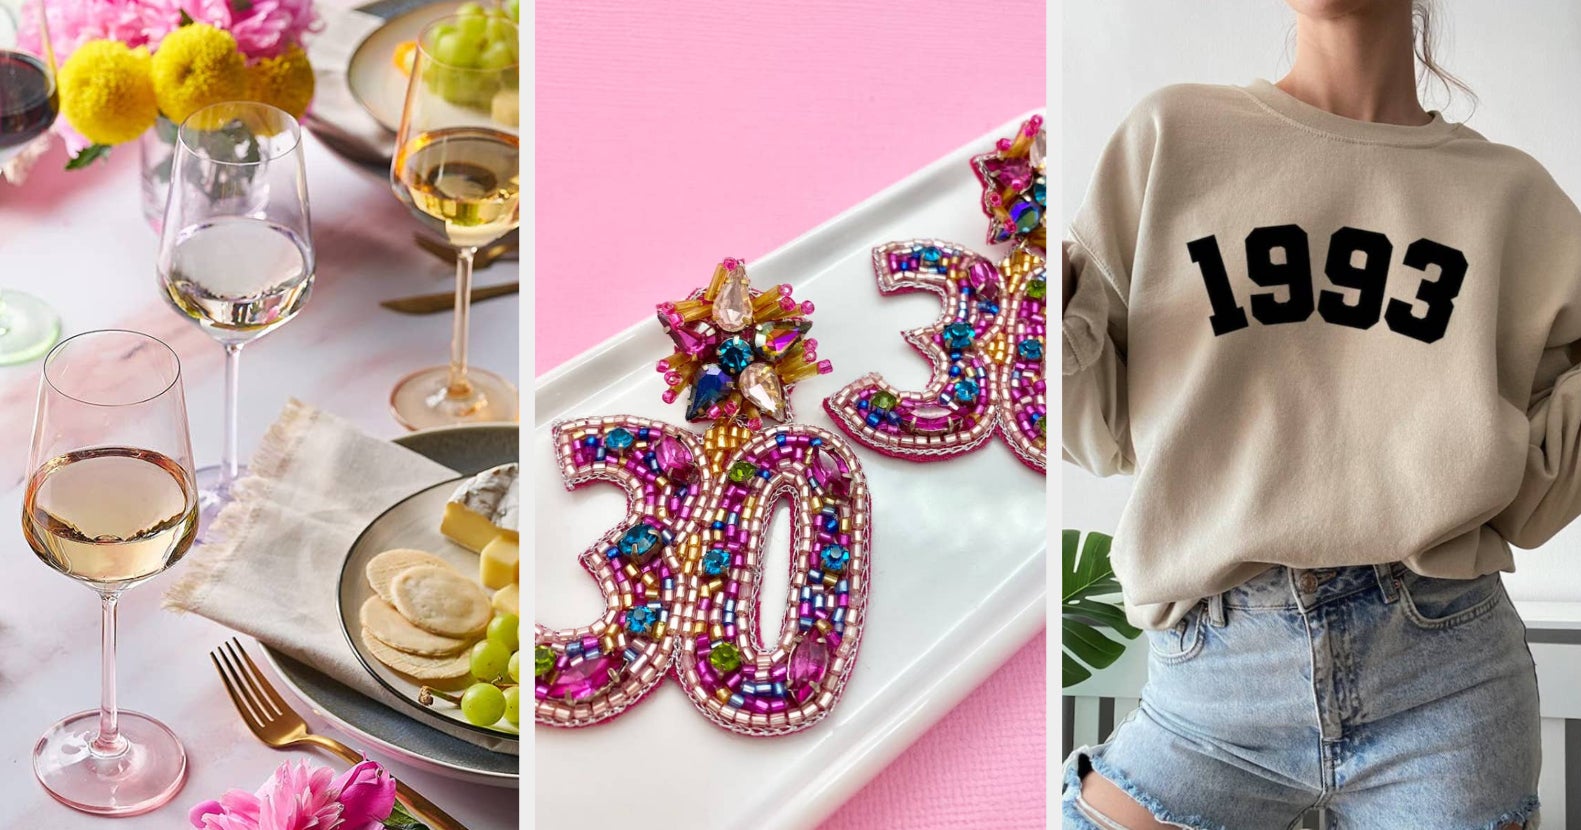 Best 30th Birthday Gifts for Her - Happy 30th Birthday Gifts for Women -  Gifts for 30th Birthday Woman - Birthday Gift Ideas for Women 30th - 30th  Birthday Decorations for Women